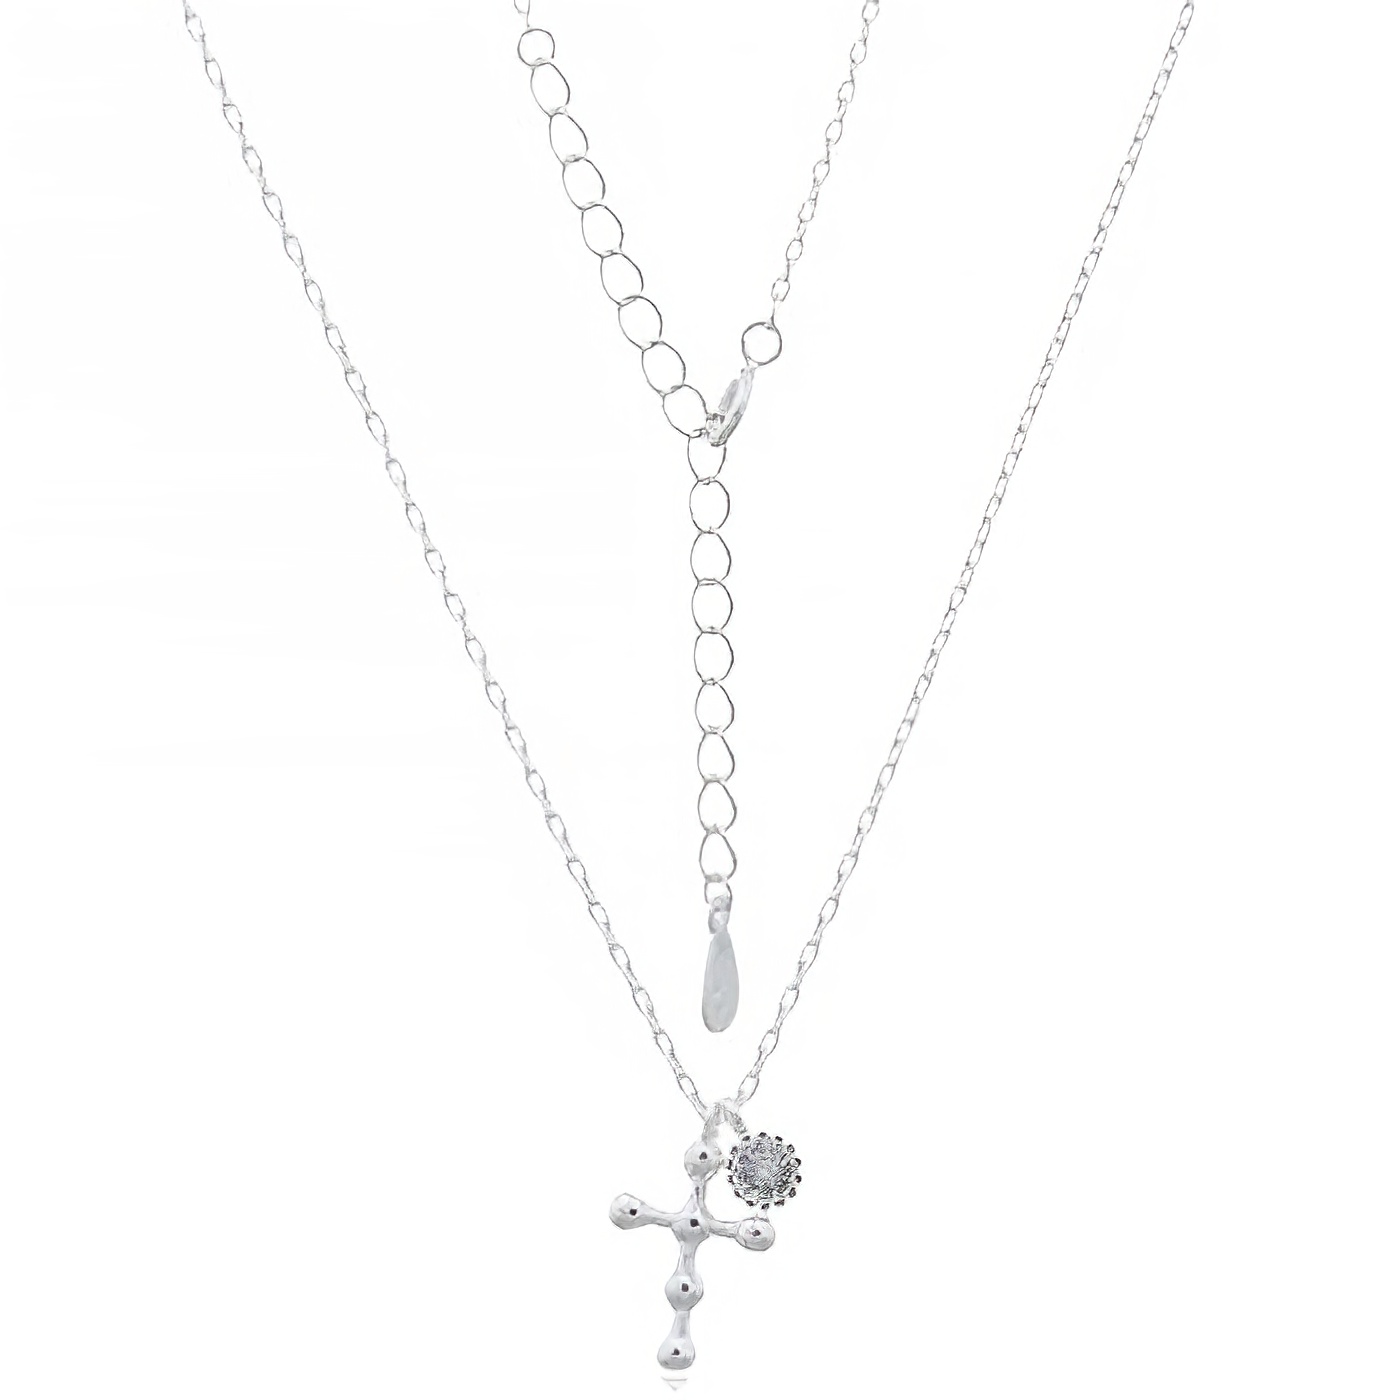 CZ White Flower Matched With Cross 925 Silver Chain Necklace by BeYindi 